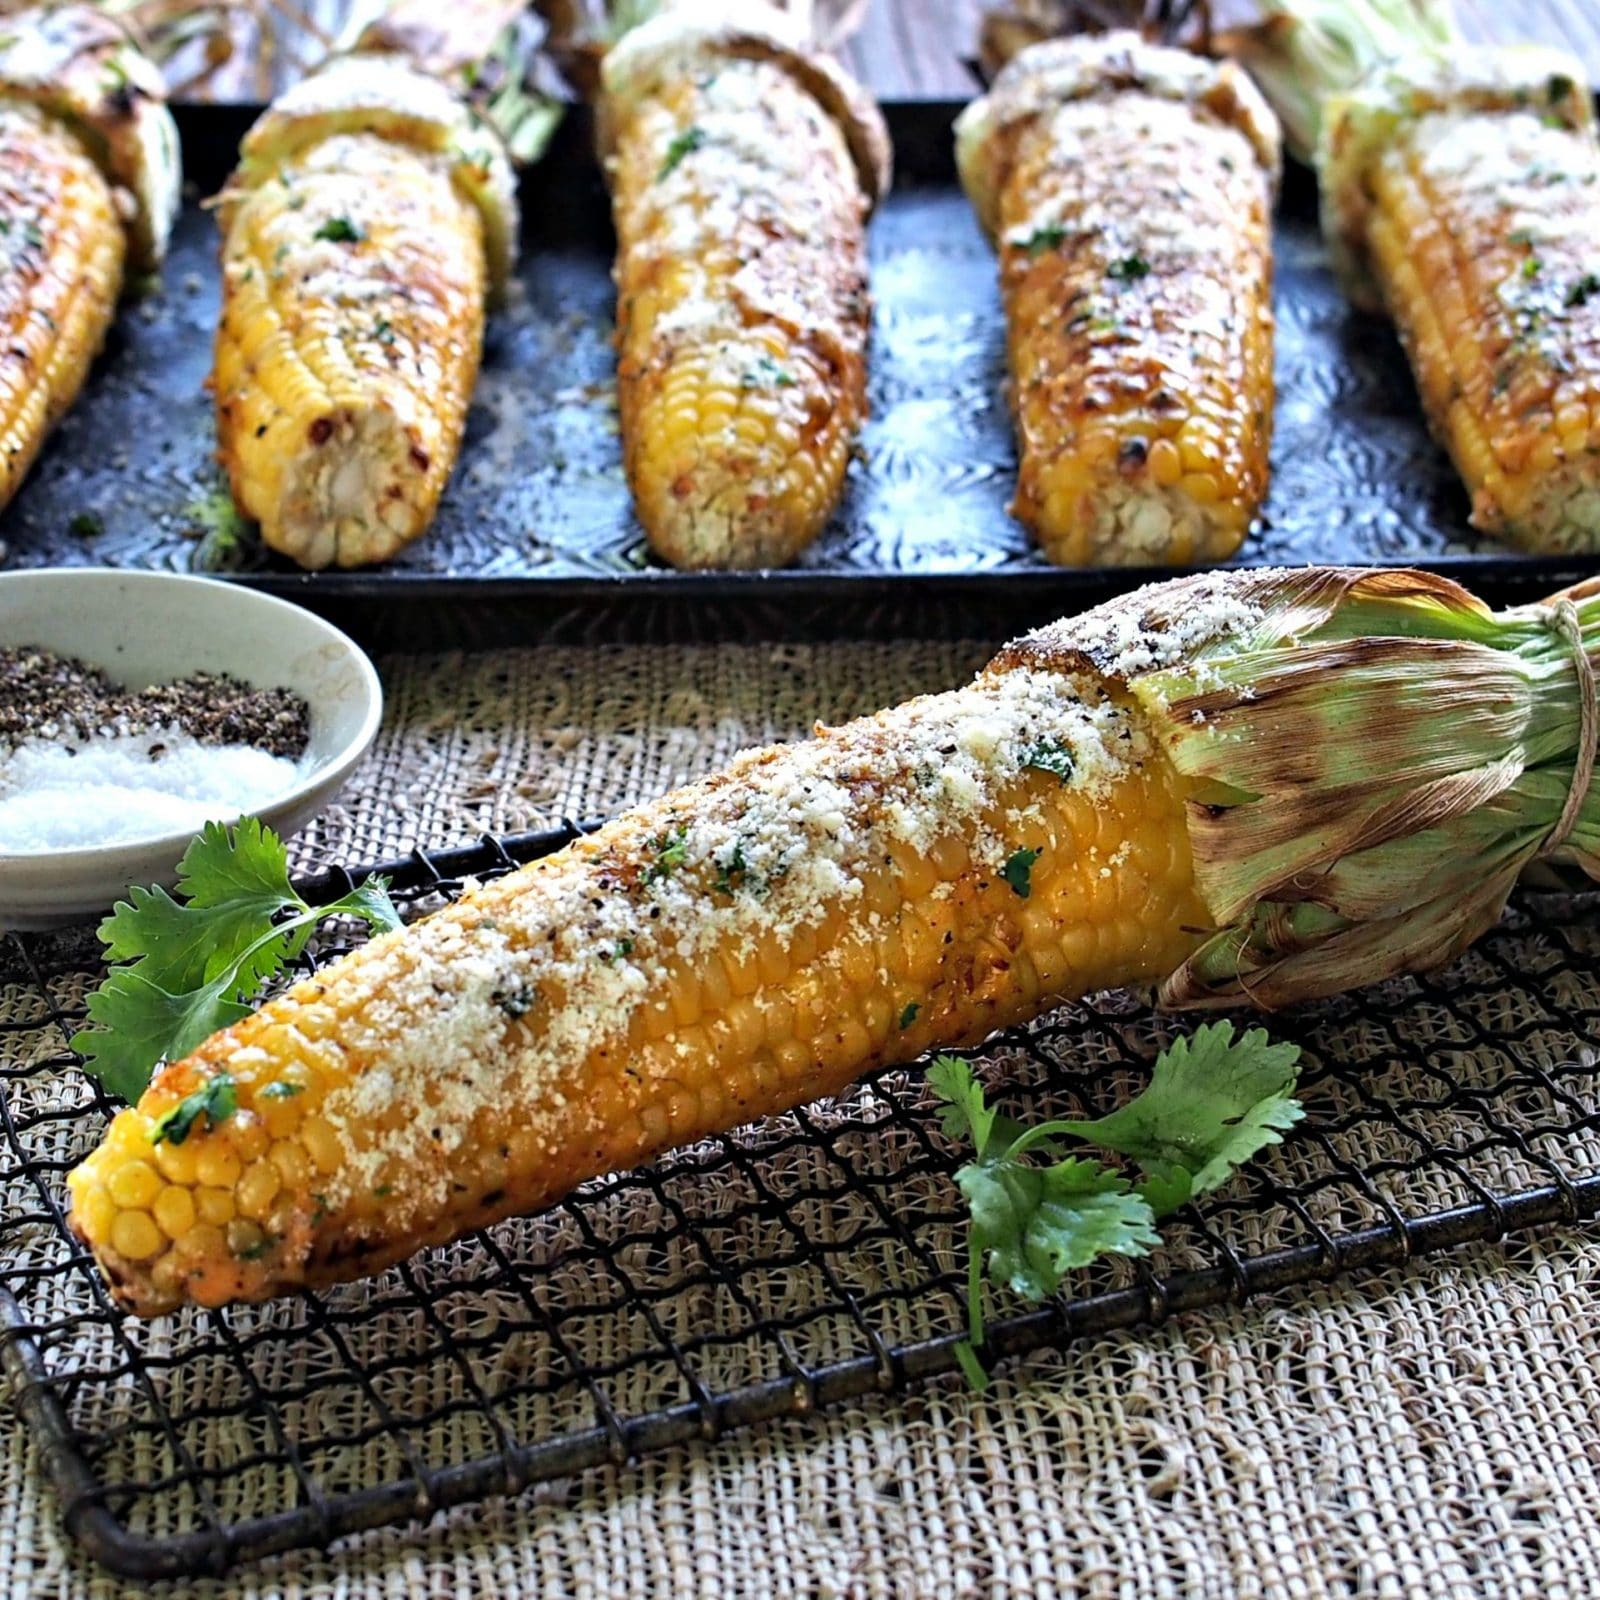 Grilled Corn - smoky, sweet and fresh, this corn-on-the-cob has all the flavors great corn should. Serve as-is or brush with your favorite condiment. Simply Sated